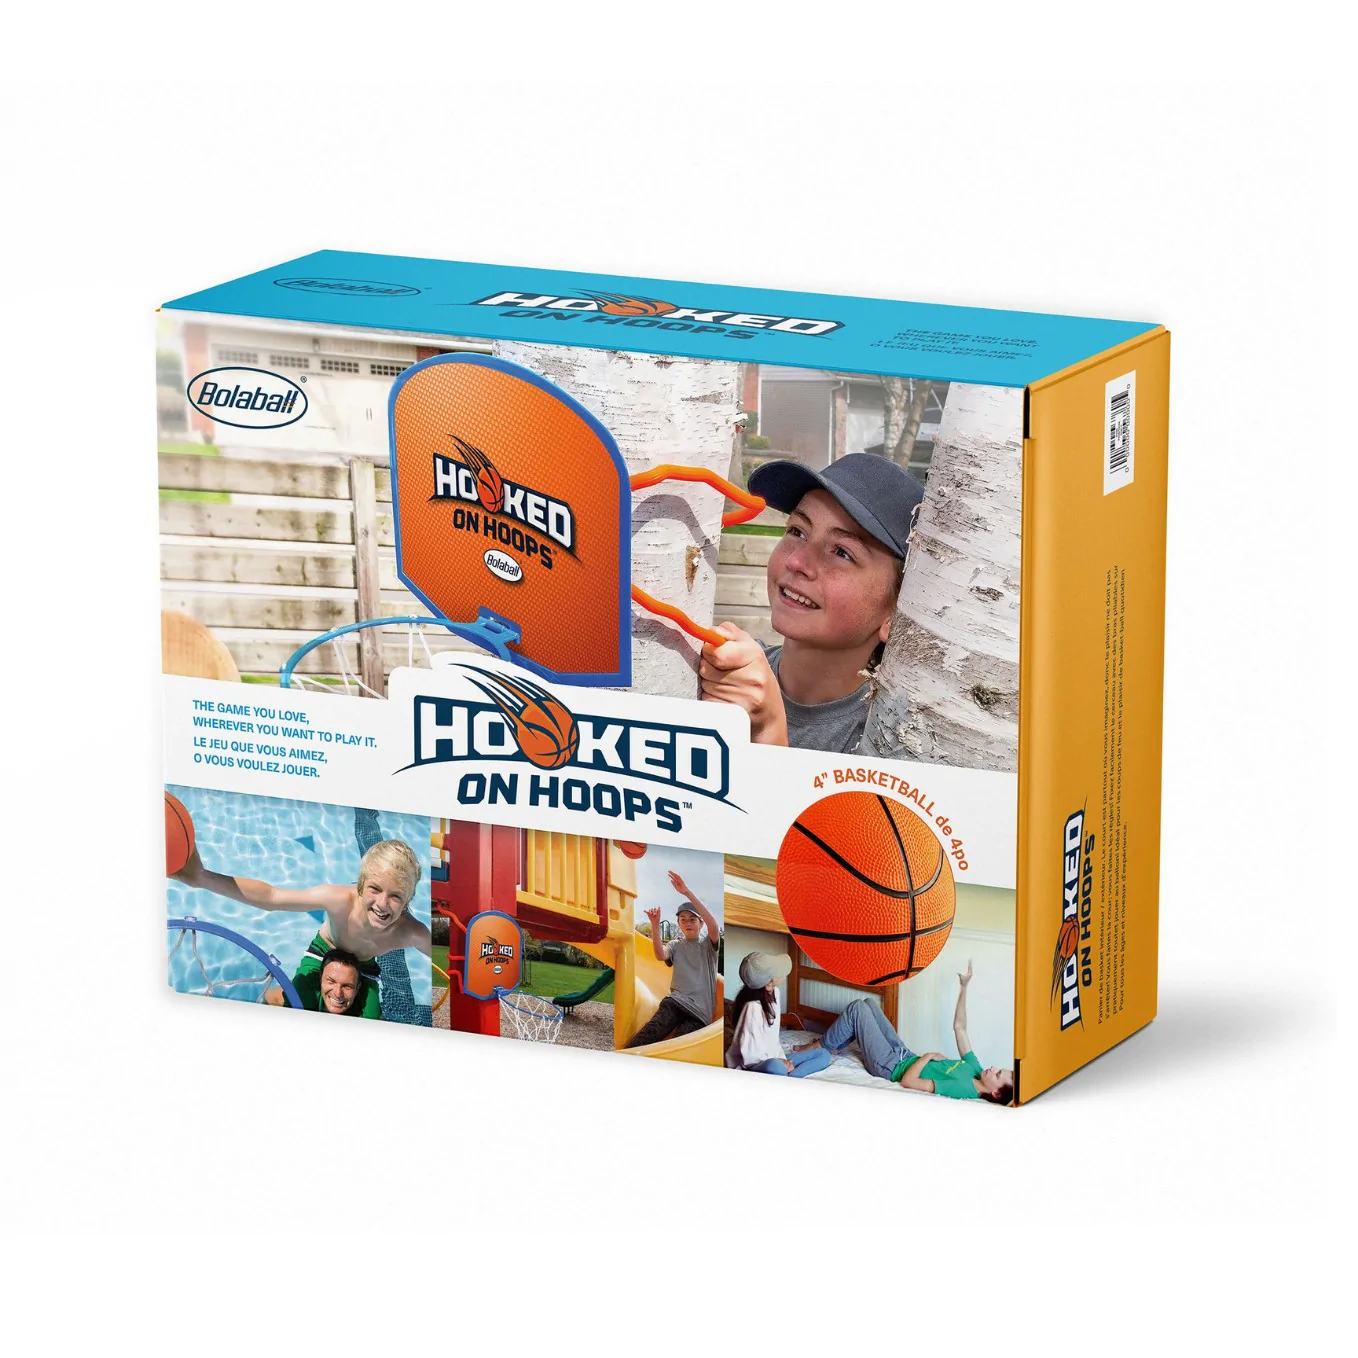 Buyers Guide Hooked On Hoops Bolaball